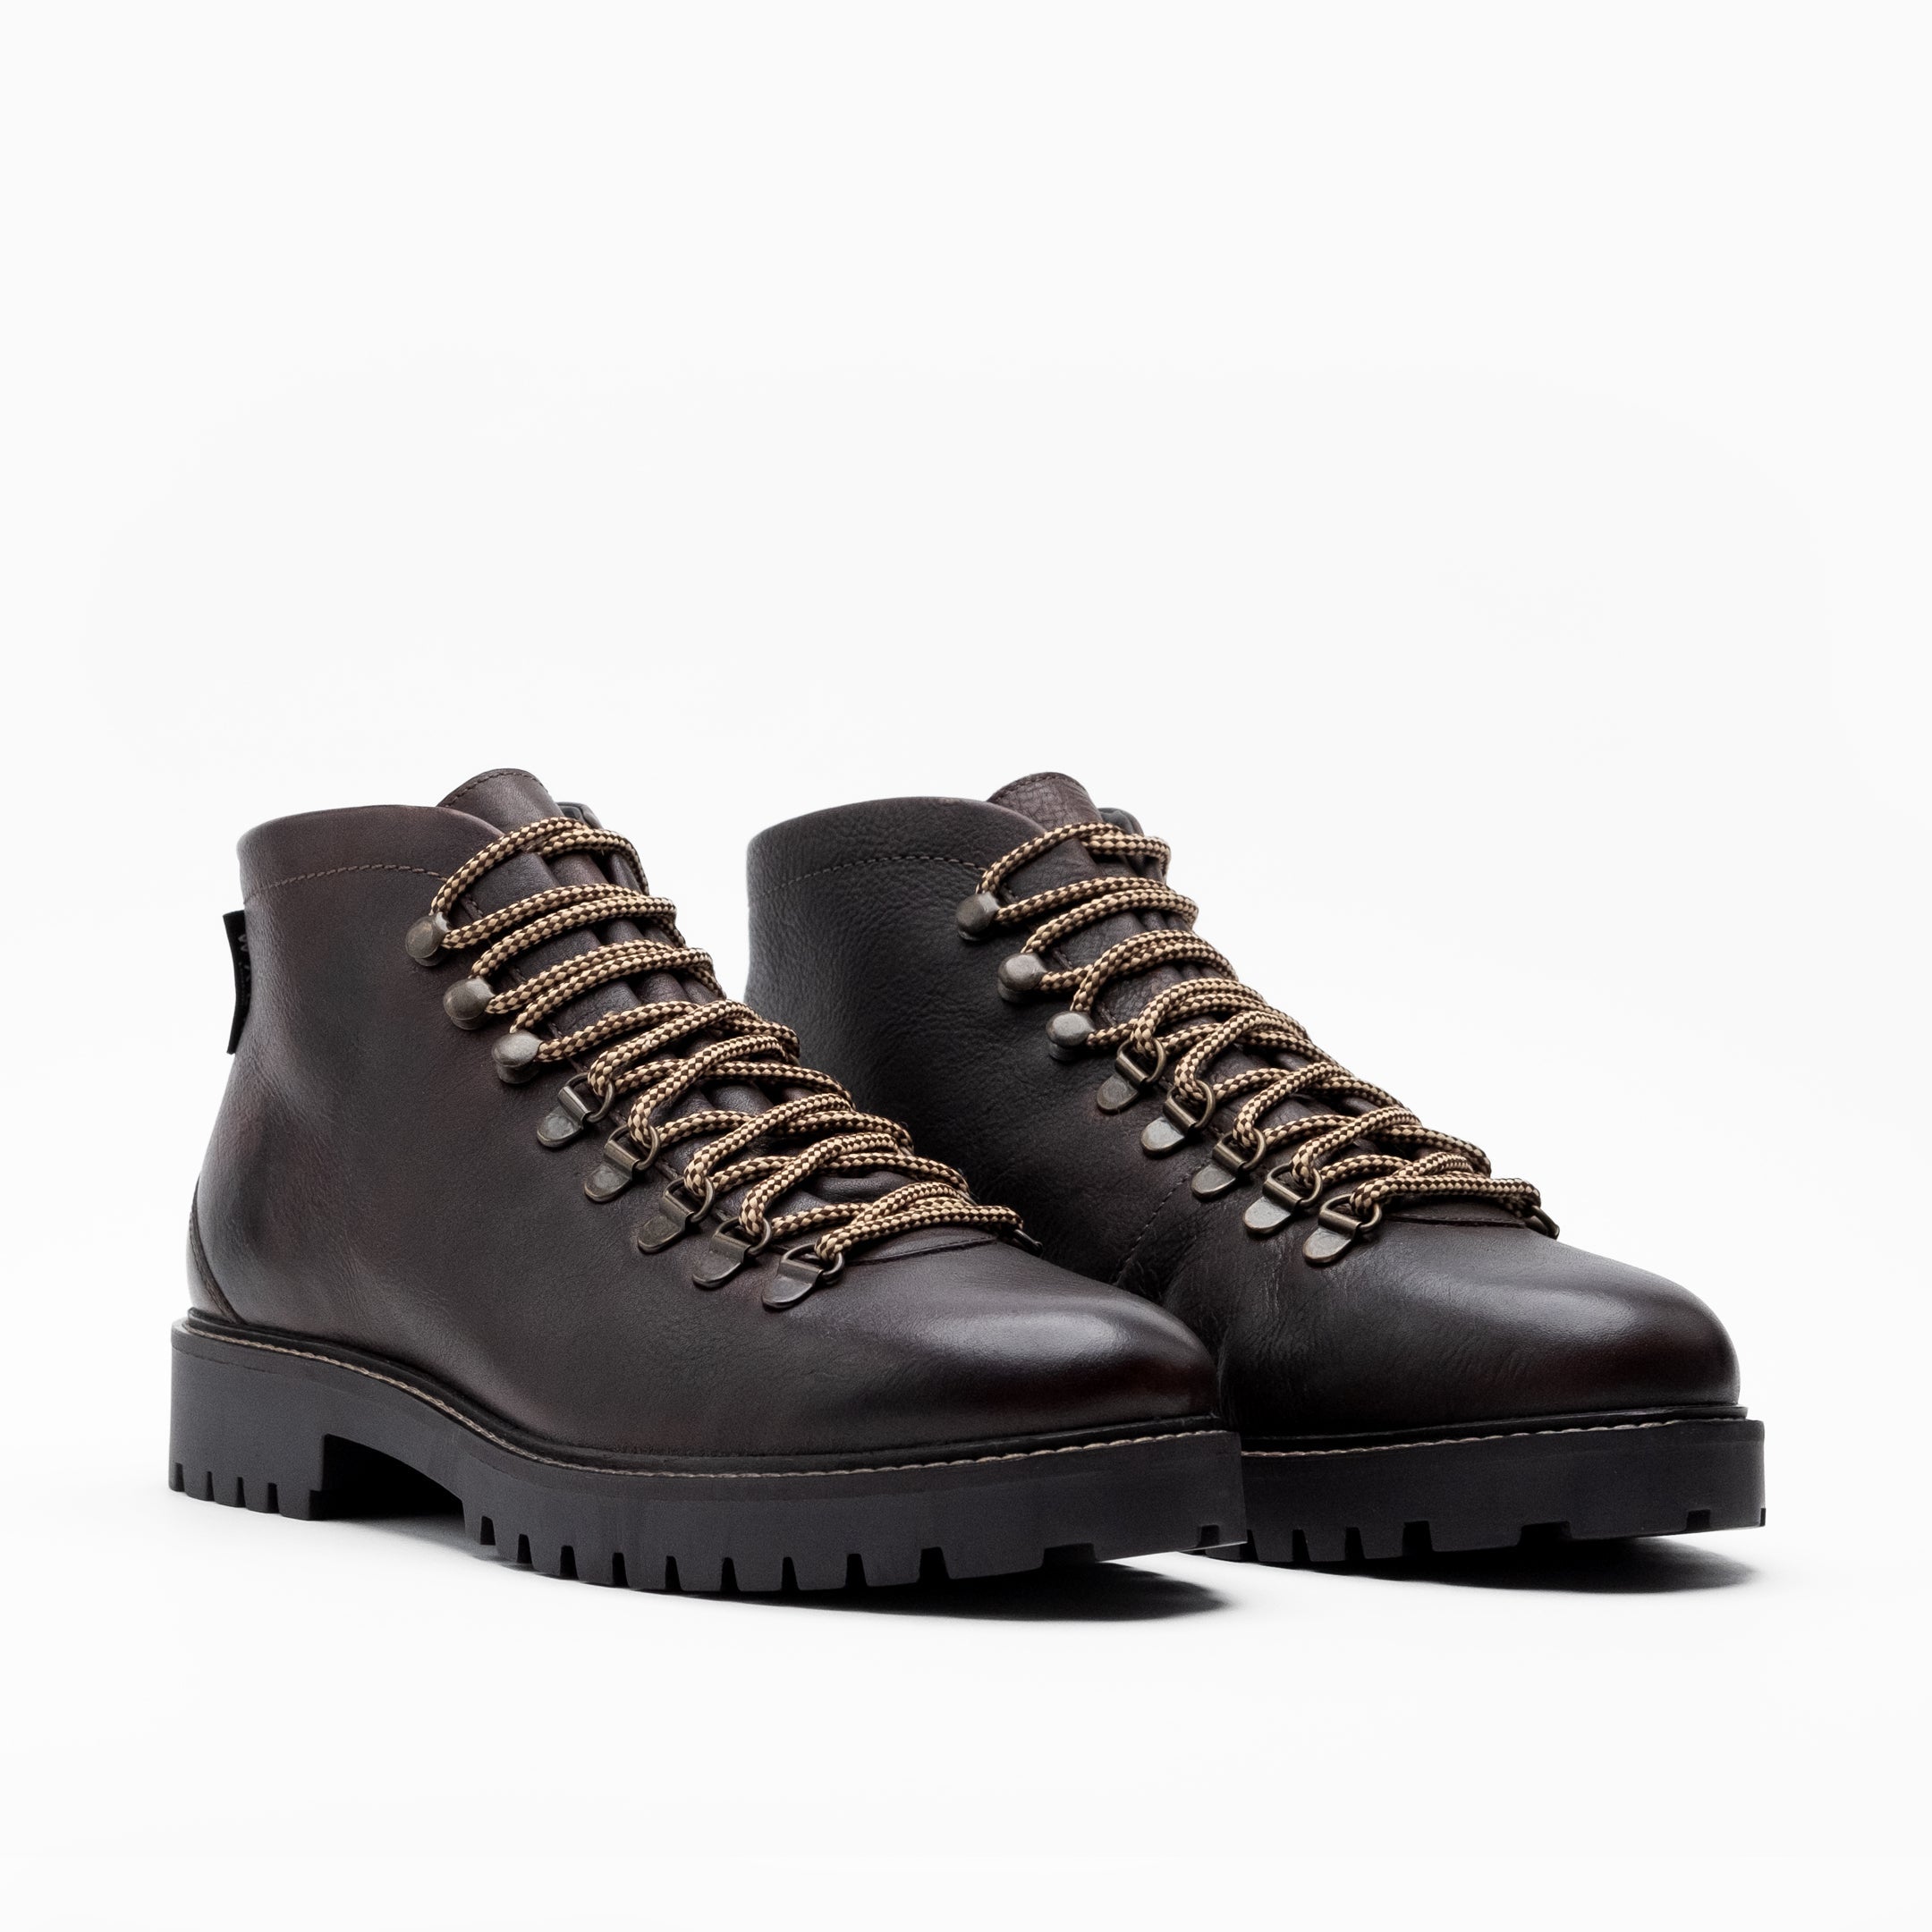 WALK London Sean Low Hiking Boots Brown Leather